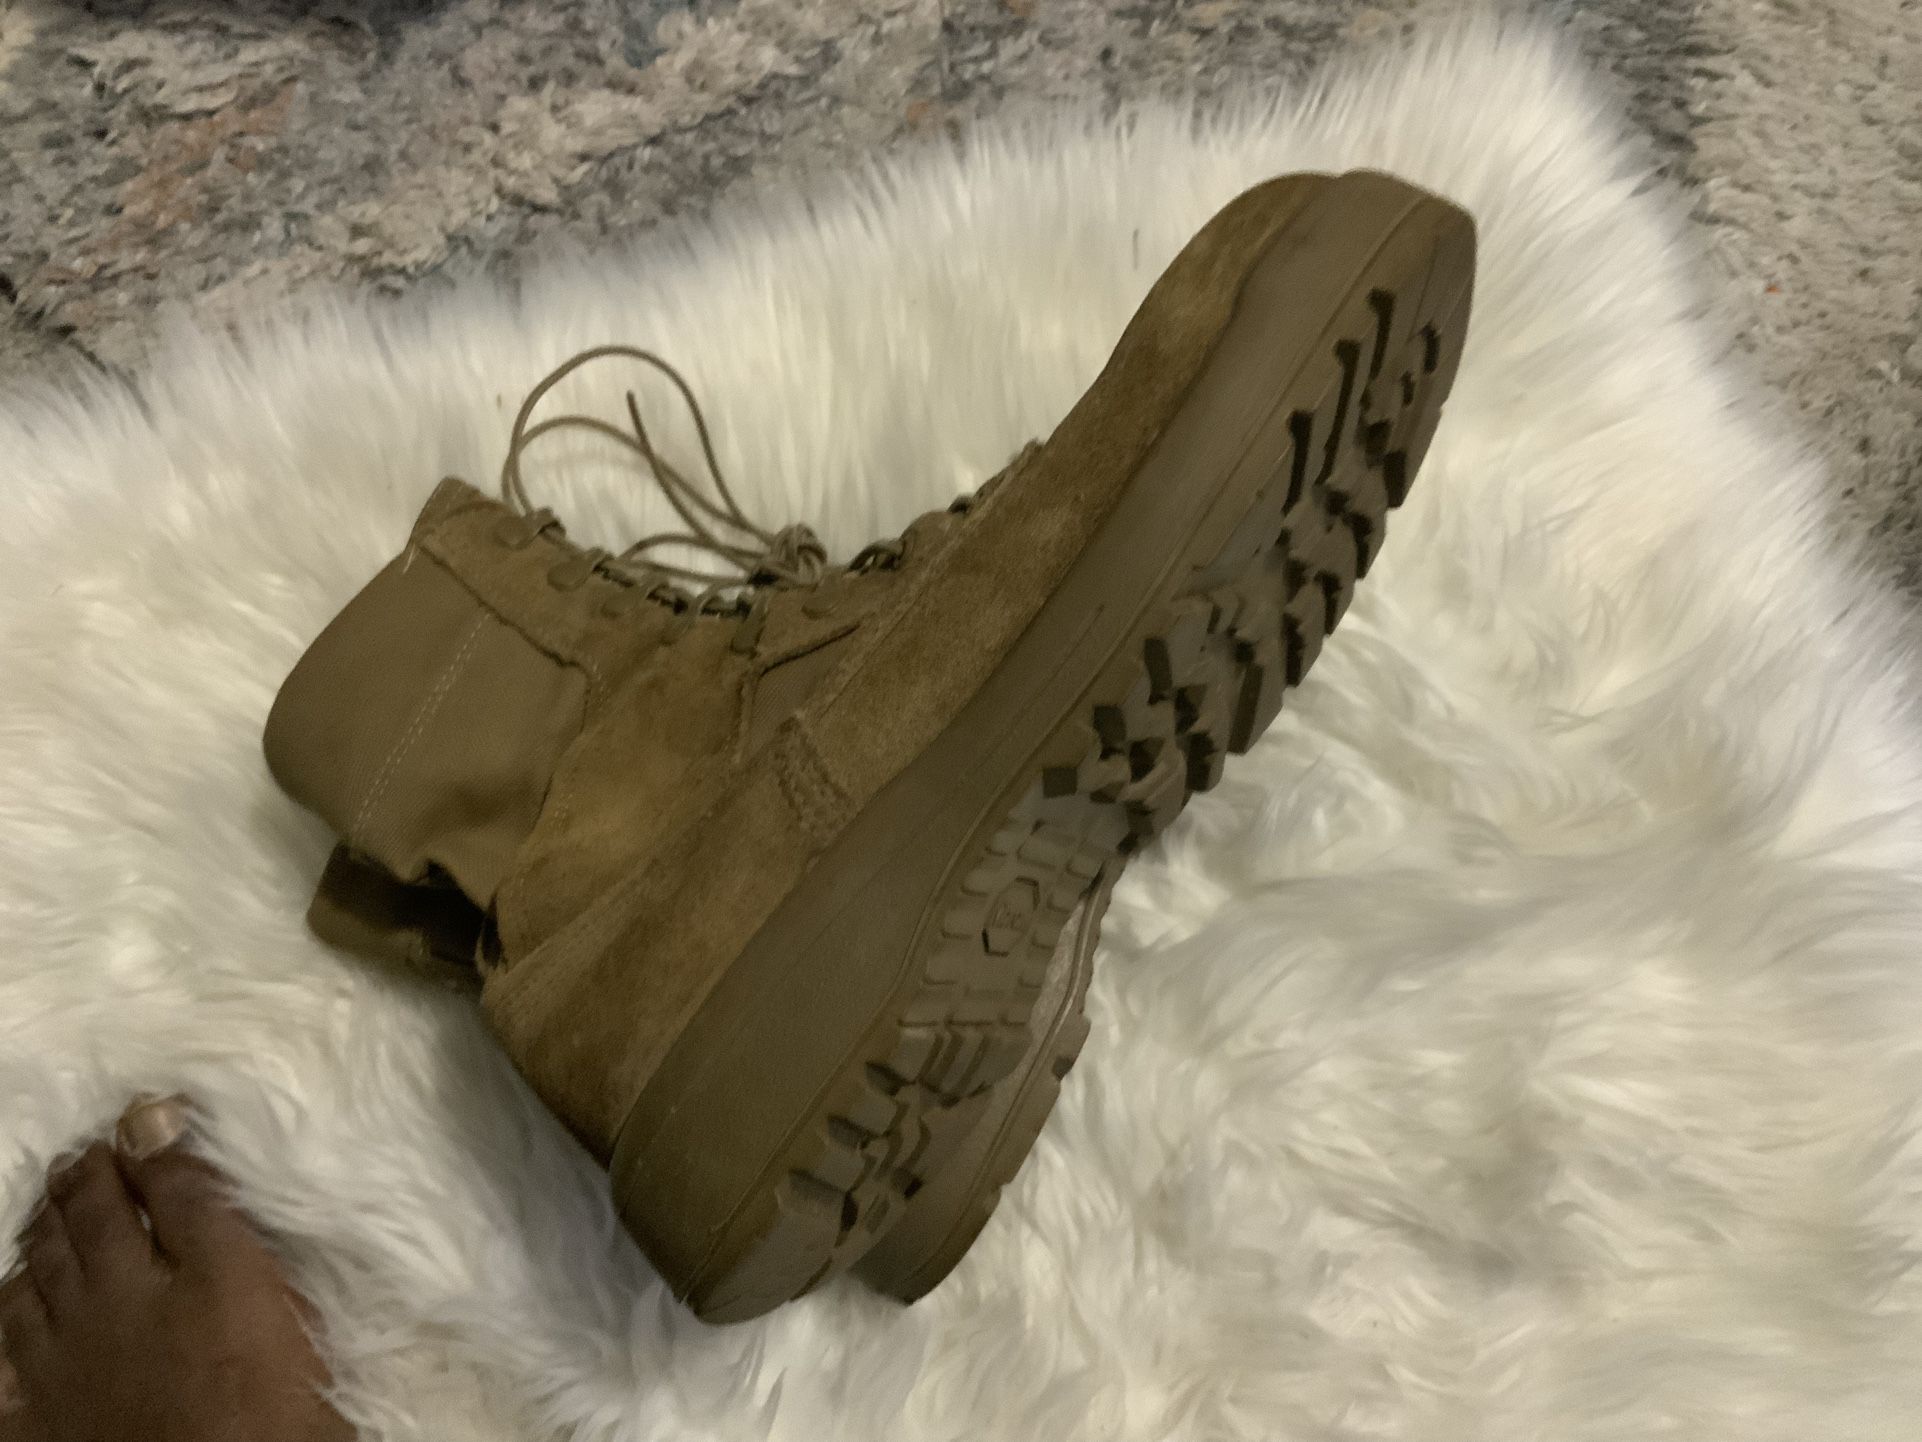 Military Boots Size 10